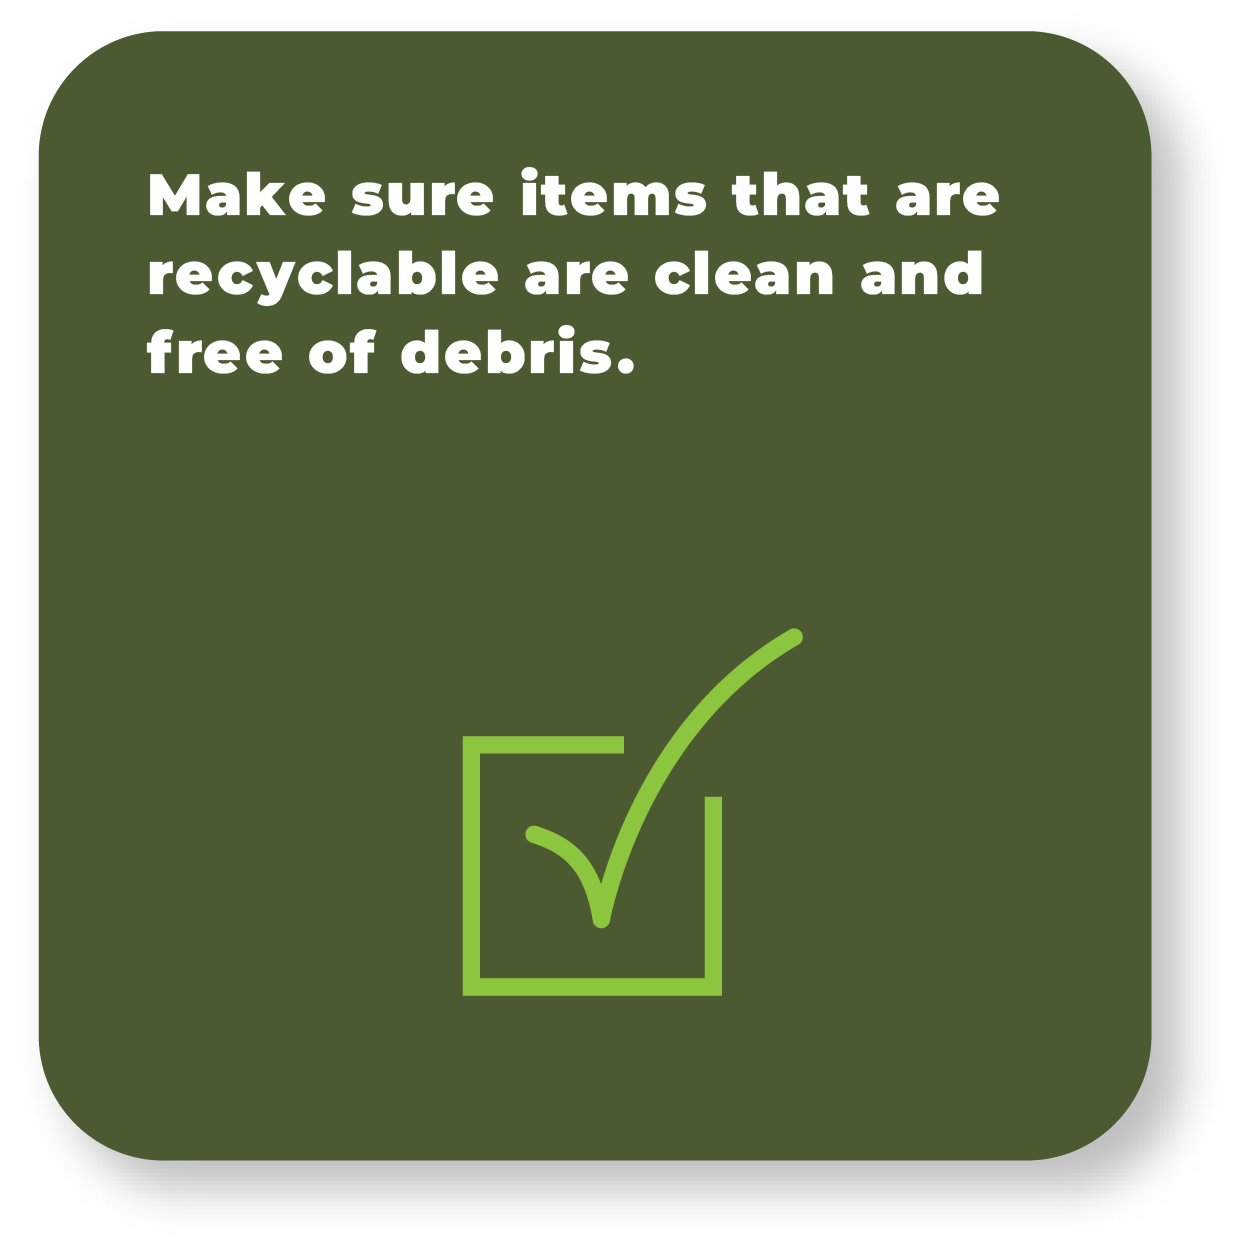 https://newsroom.heb.com/wp-content/uploads/2018/01/Texas-recycles-day-slides-mobile-06.png